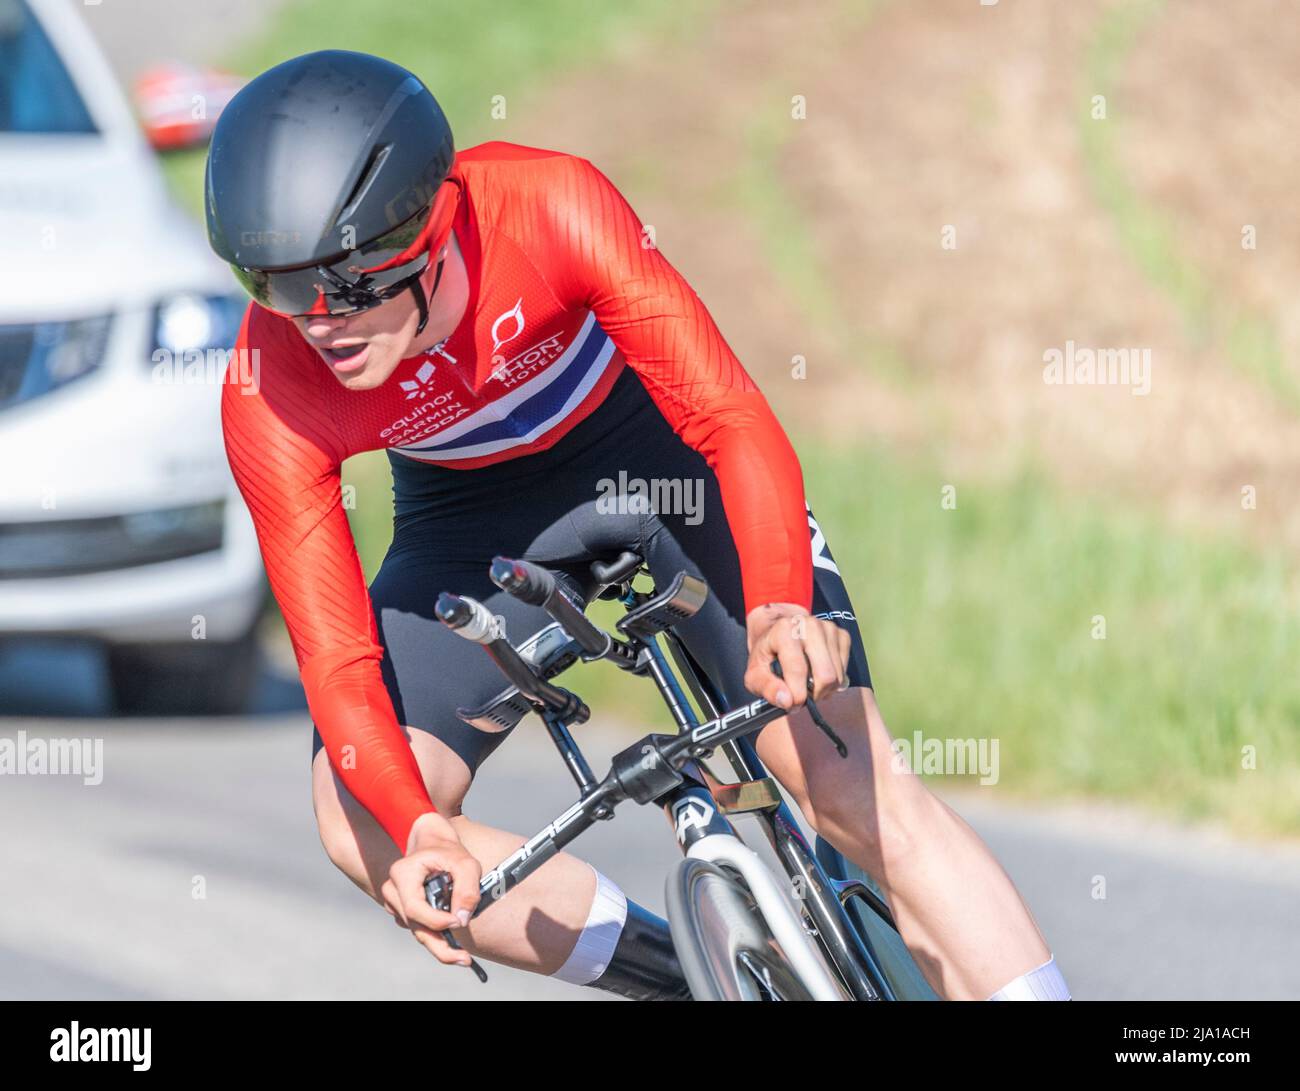 Puidoux Switzerland. 26th May, 2022: Jerome Gauthier of Canada is in action during Prologue of the M19 2022 'Tour du Pays de Vaud'. Prologue of the U19 cycling 'Tour du Pays de Vaud' took place in the village of Puidoux and in the heart of Lavaux. Credit Eric Dubost/Alamy Live News. Stock Photo